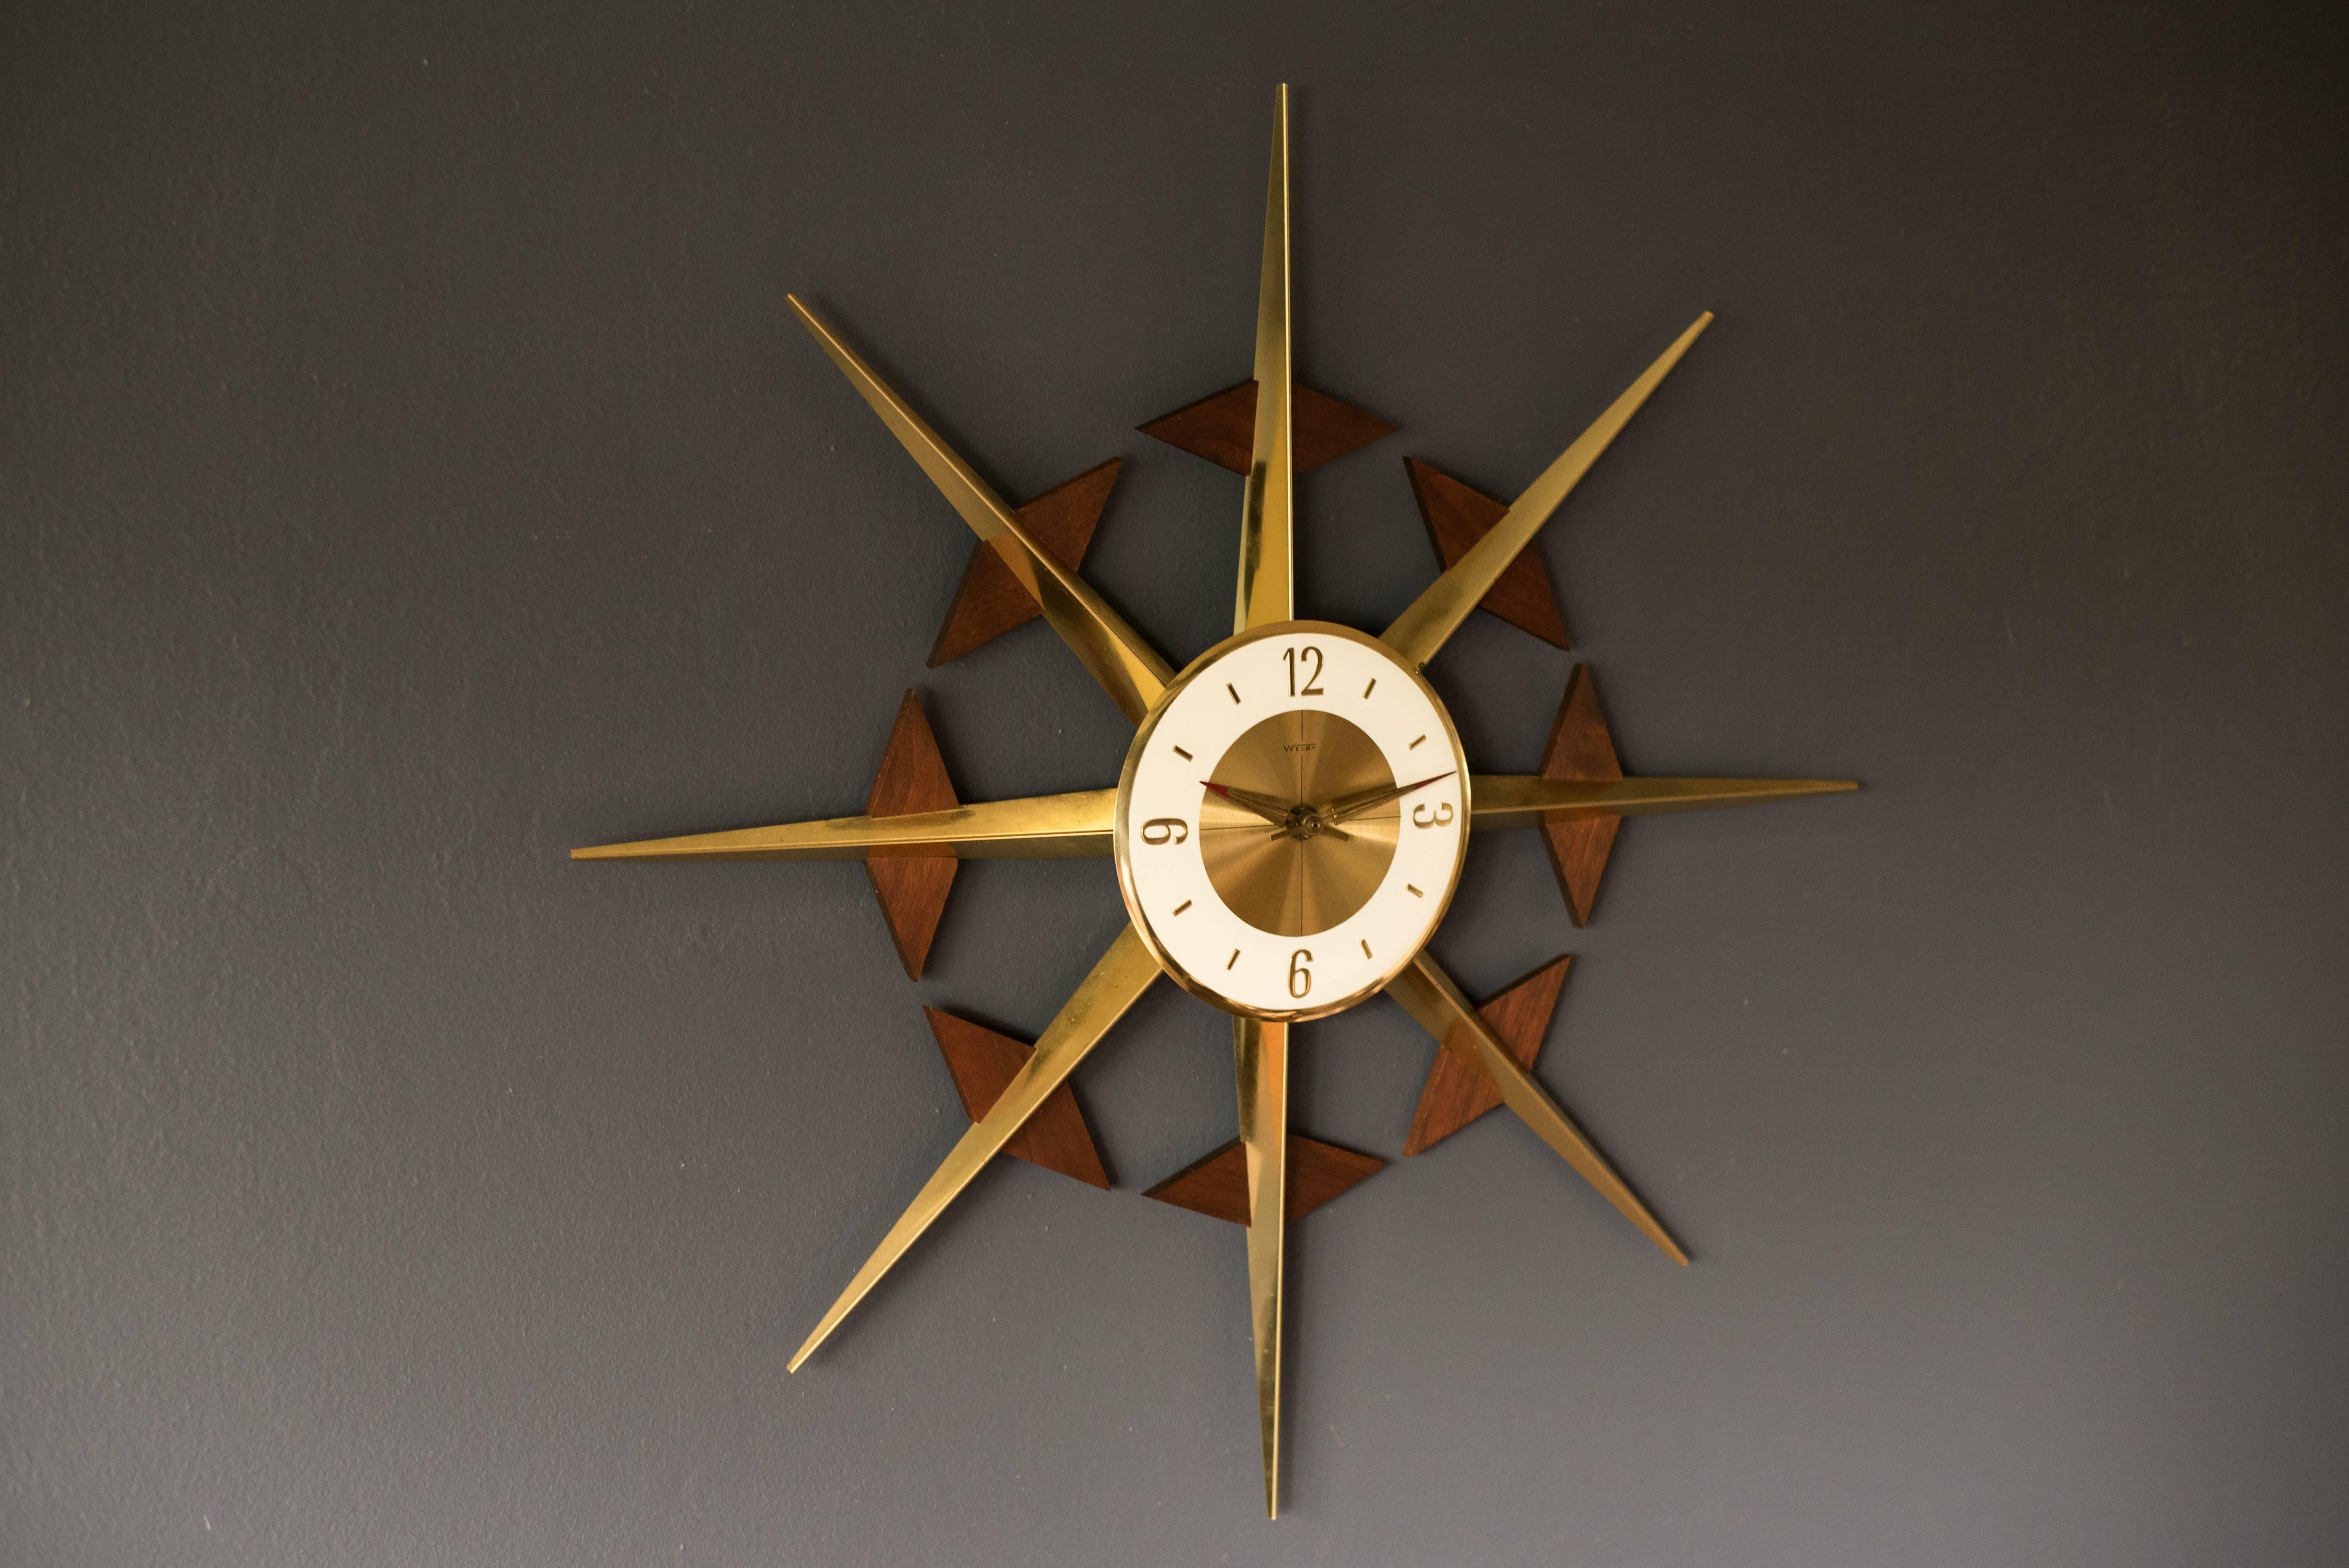 Mid-Century atomic starburst wall clock in walnut and brass. This piece includes original mechanism and looks great with any modern decor.

Dimensions: 25